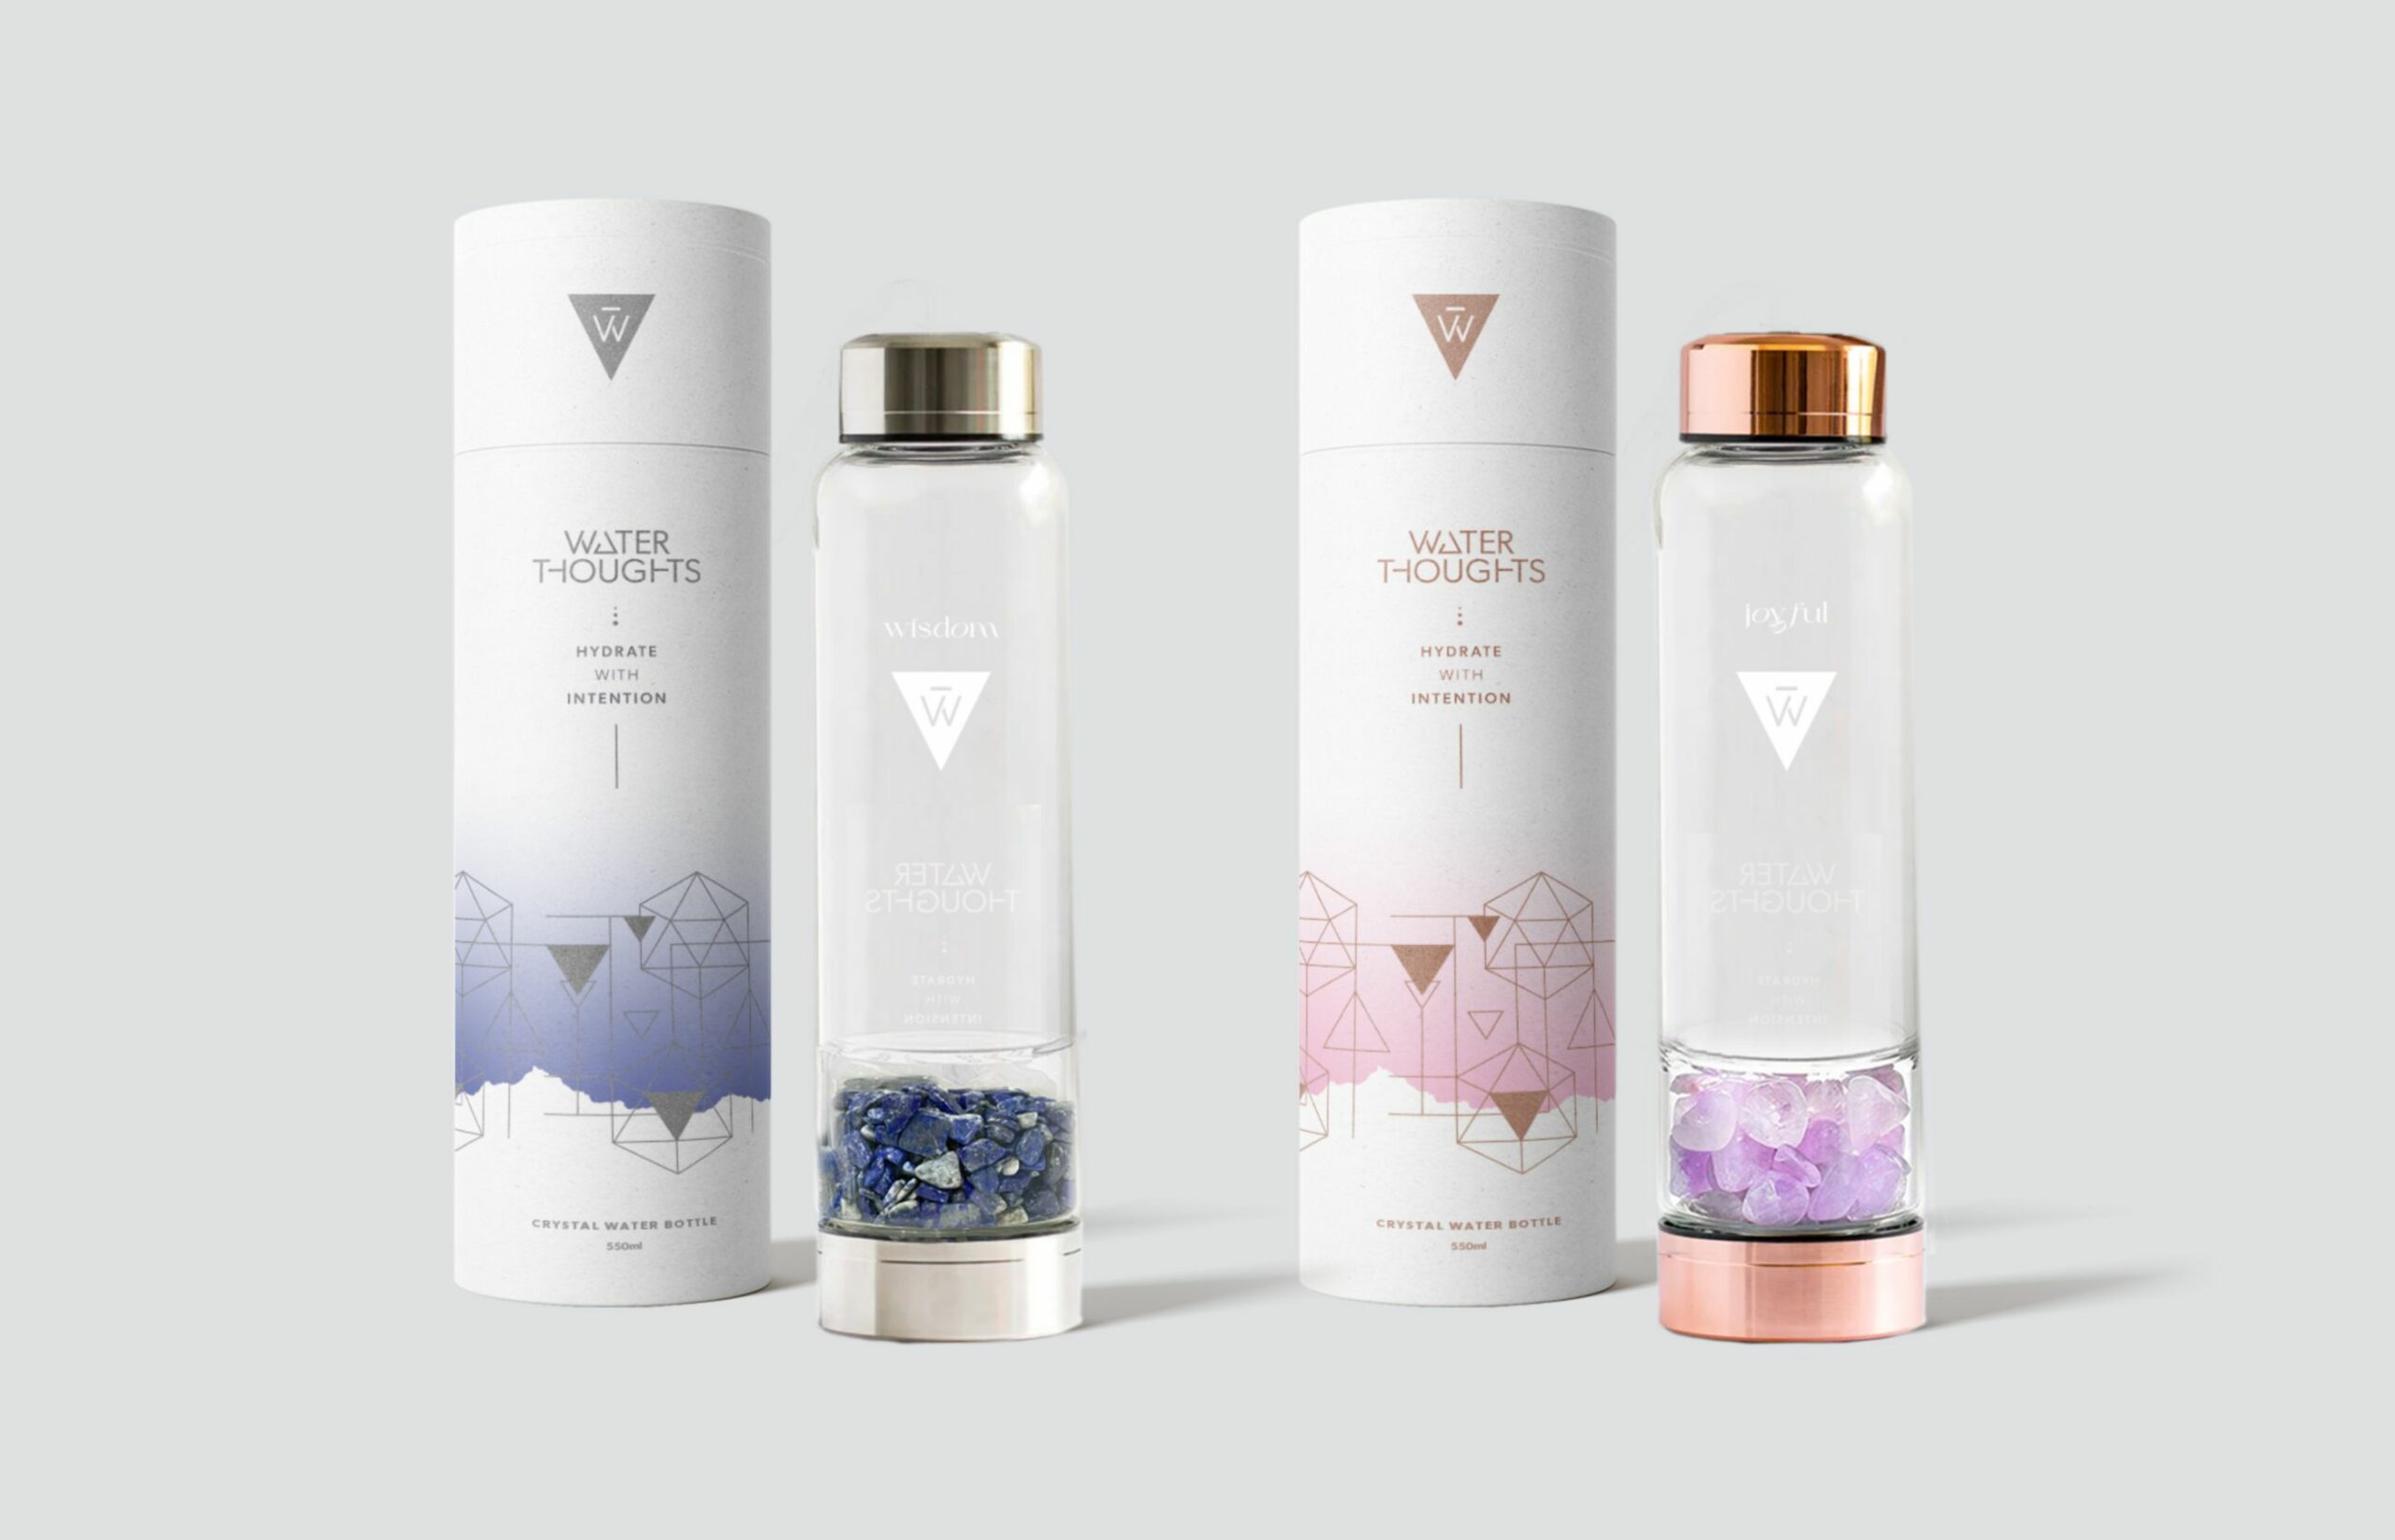 Water Thoughts Crystal Water Bottles Branding, Packaging & Website Design and Development by TL Design Co.